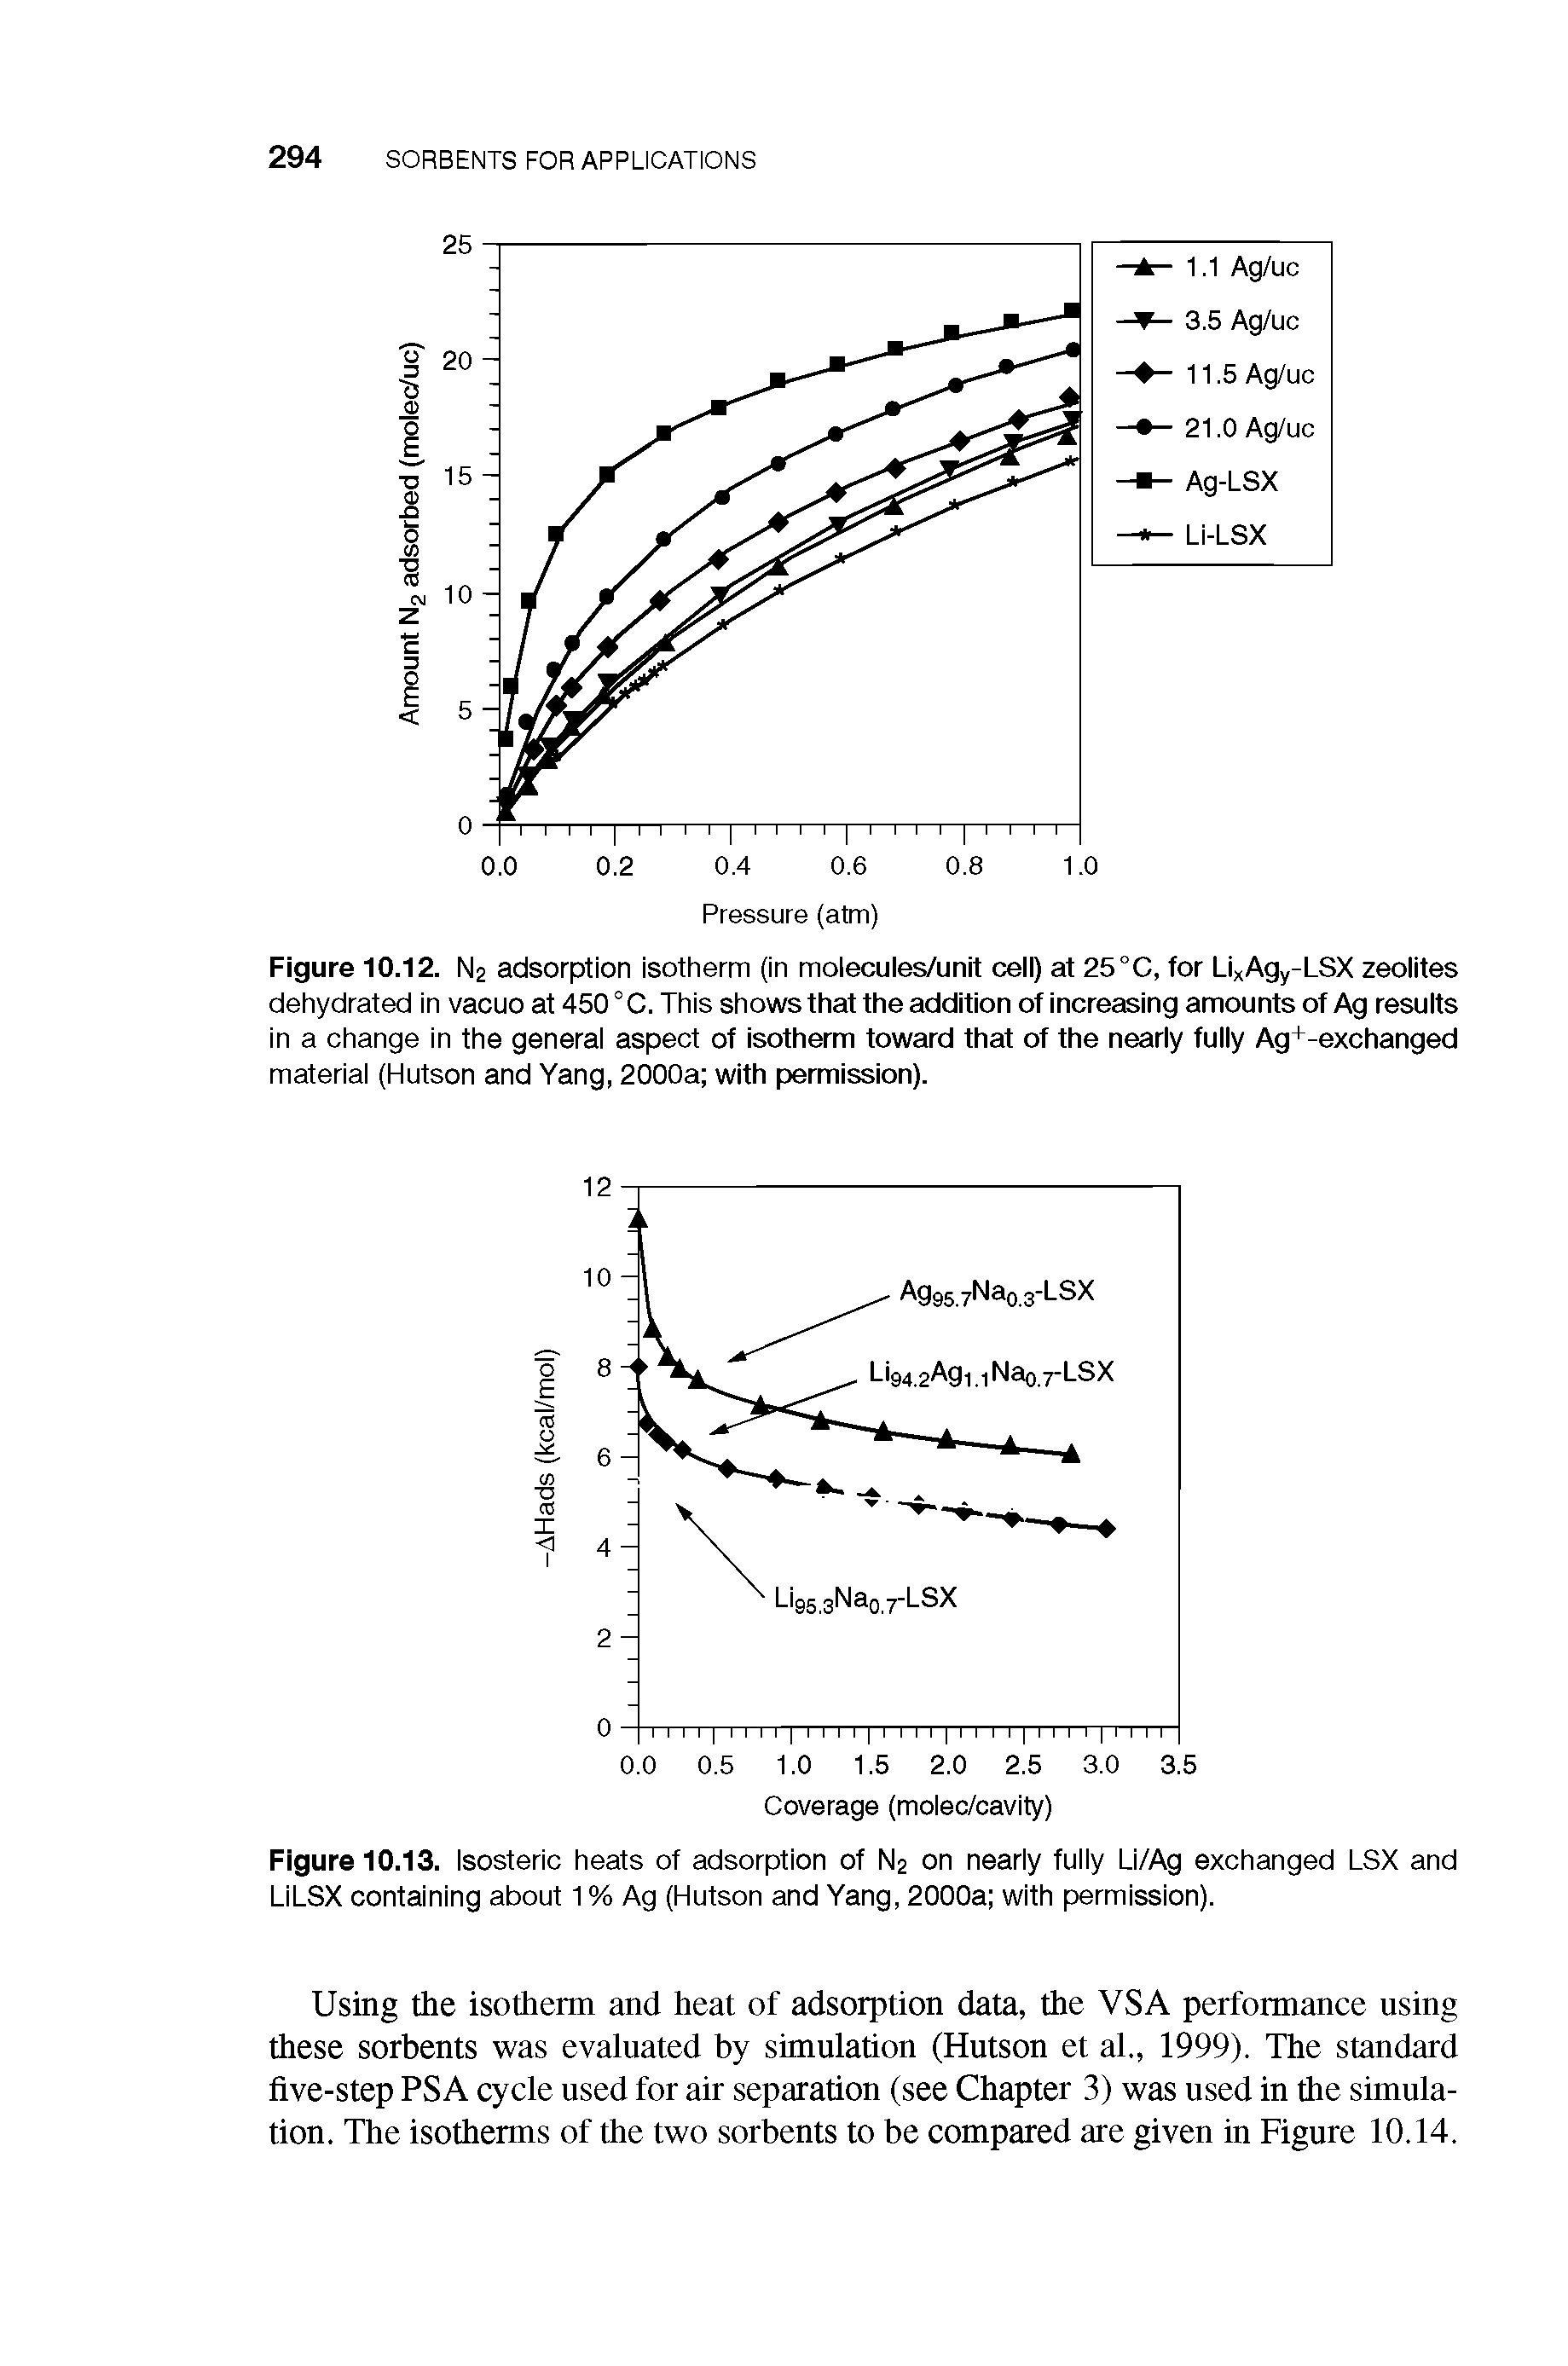 Figure 10.12. N2 adsorption isotherm (in molecules/unit cell) at 25 °C, for LixAgyLSX zeolites dehydrated in vacuo at 450 ° C. This shows that the addition of increasing amounts of Ag results in a change in the generai aspect of isotherm toward that of the nearly fully Ag+-exchanged material (Hutson and Yang, 2000a with permission).